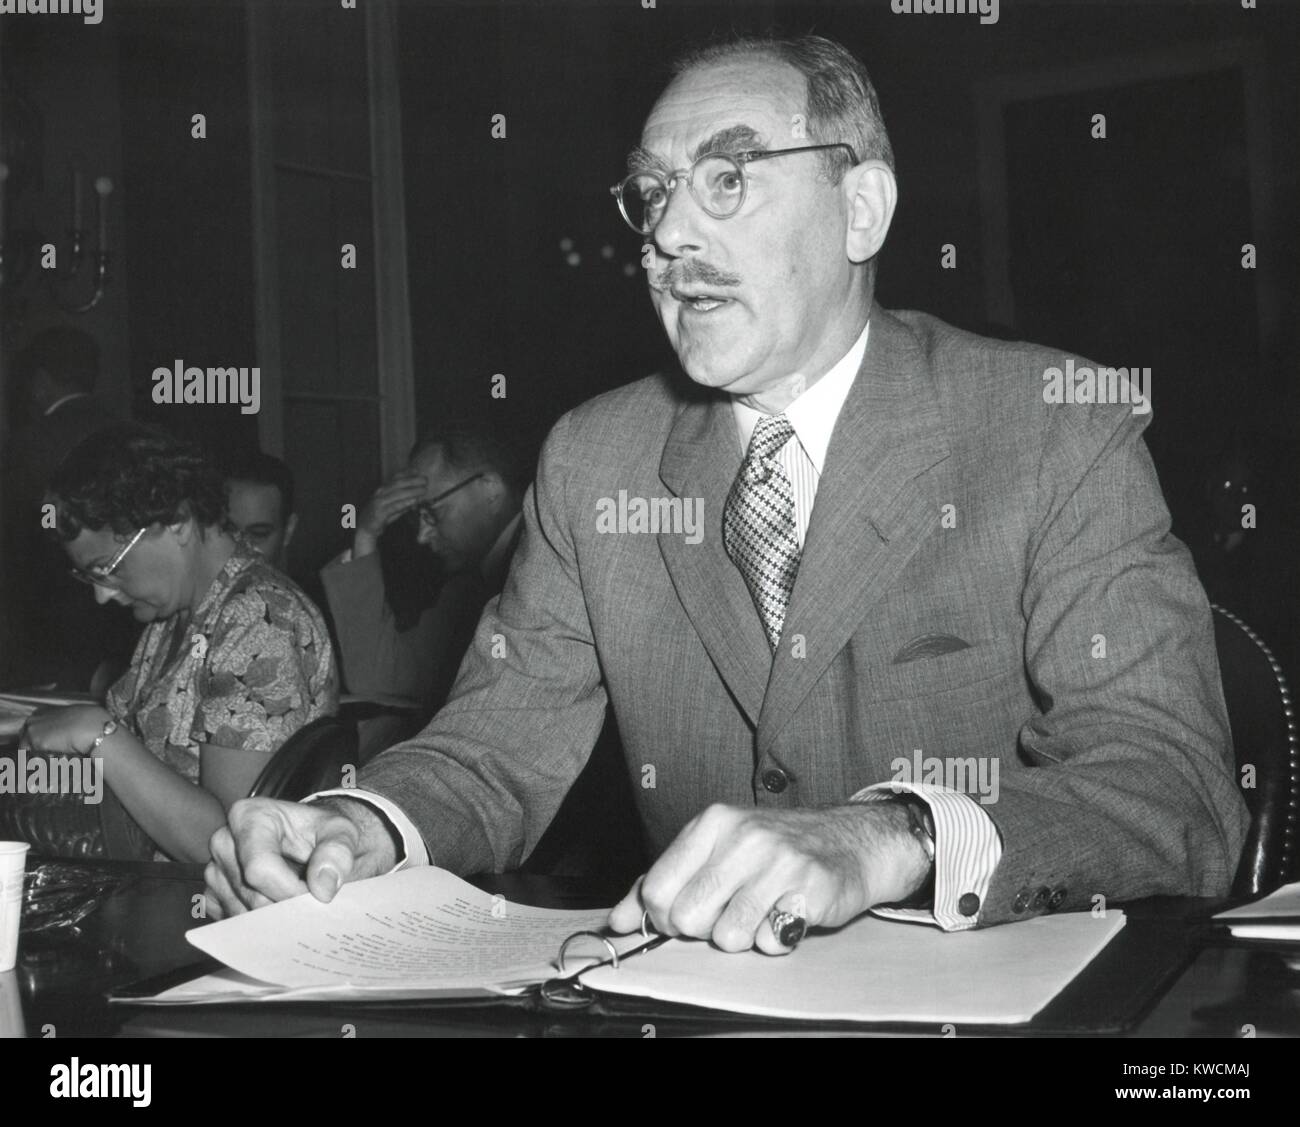 Dean Acheson, Sec. of State, testifying before the House Foreign Affairs Committee. He was supporting a second Mutual Defense Assistance Program before the house Foreign Affairs Committee. June 5, 1950. - (BSLOC_2014_15_108) Stock Photo